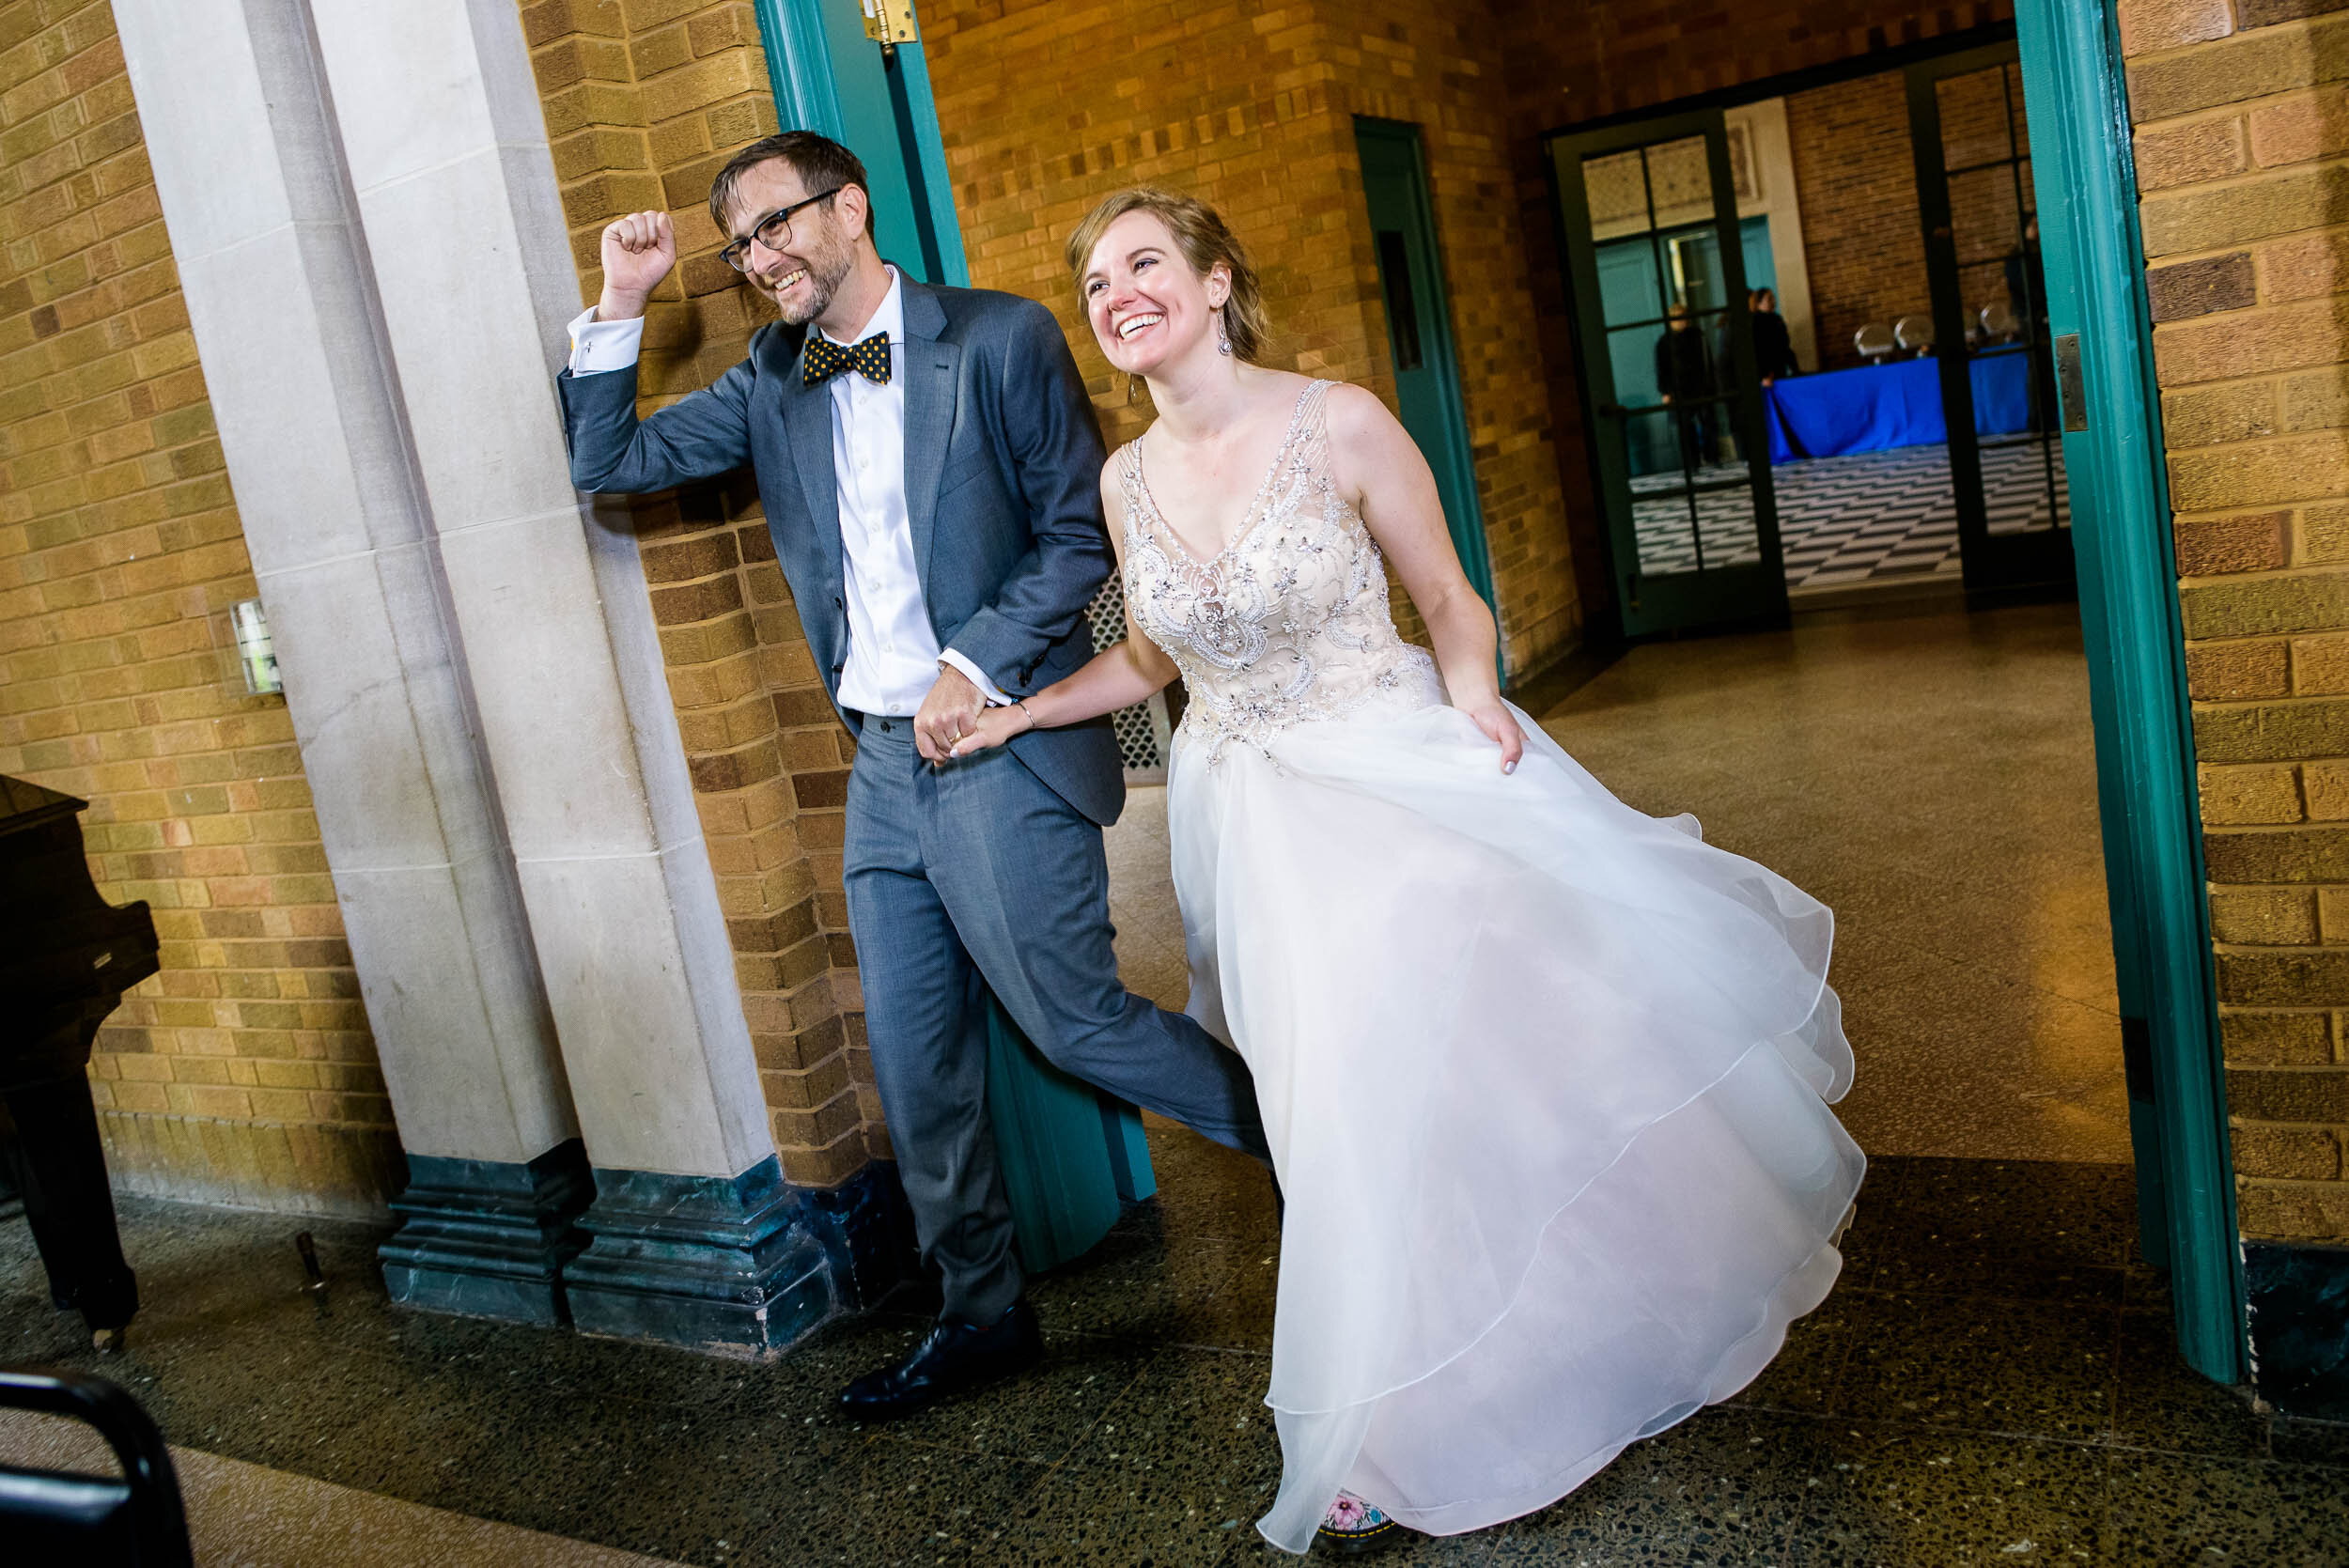 Bride and groom introduced during their wedding reception: Columbus Park Refectory Chicago wedding captured by J. Brown Photography.